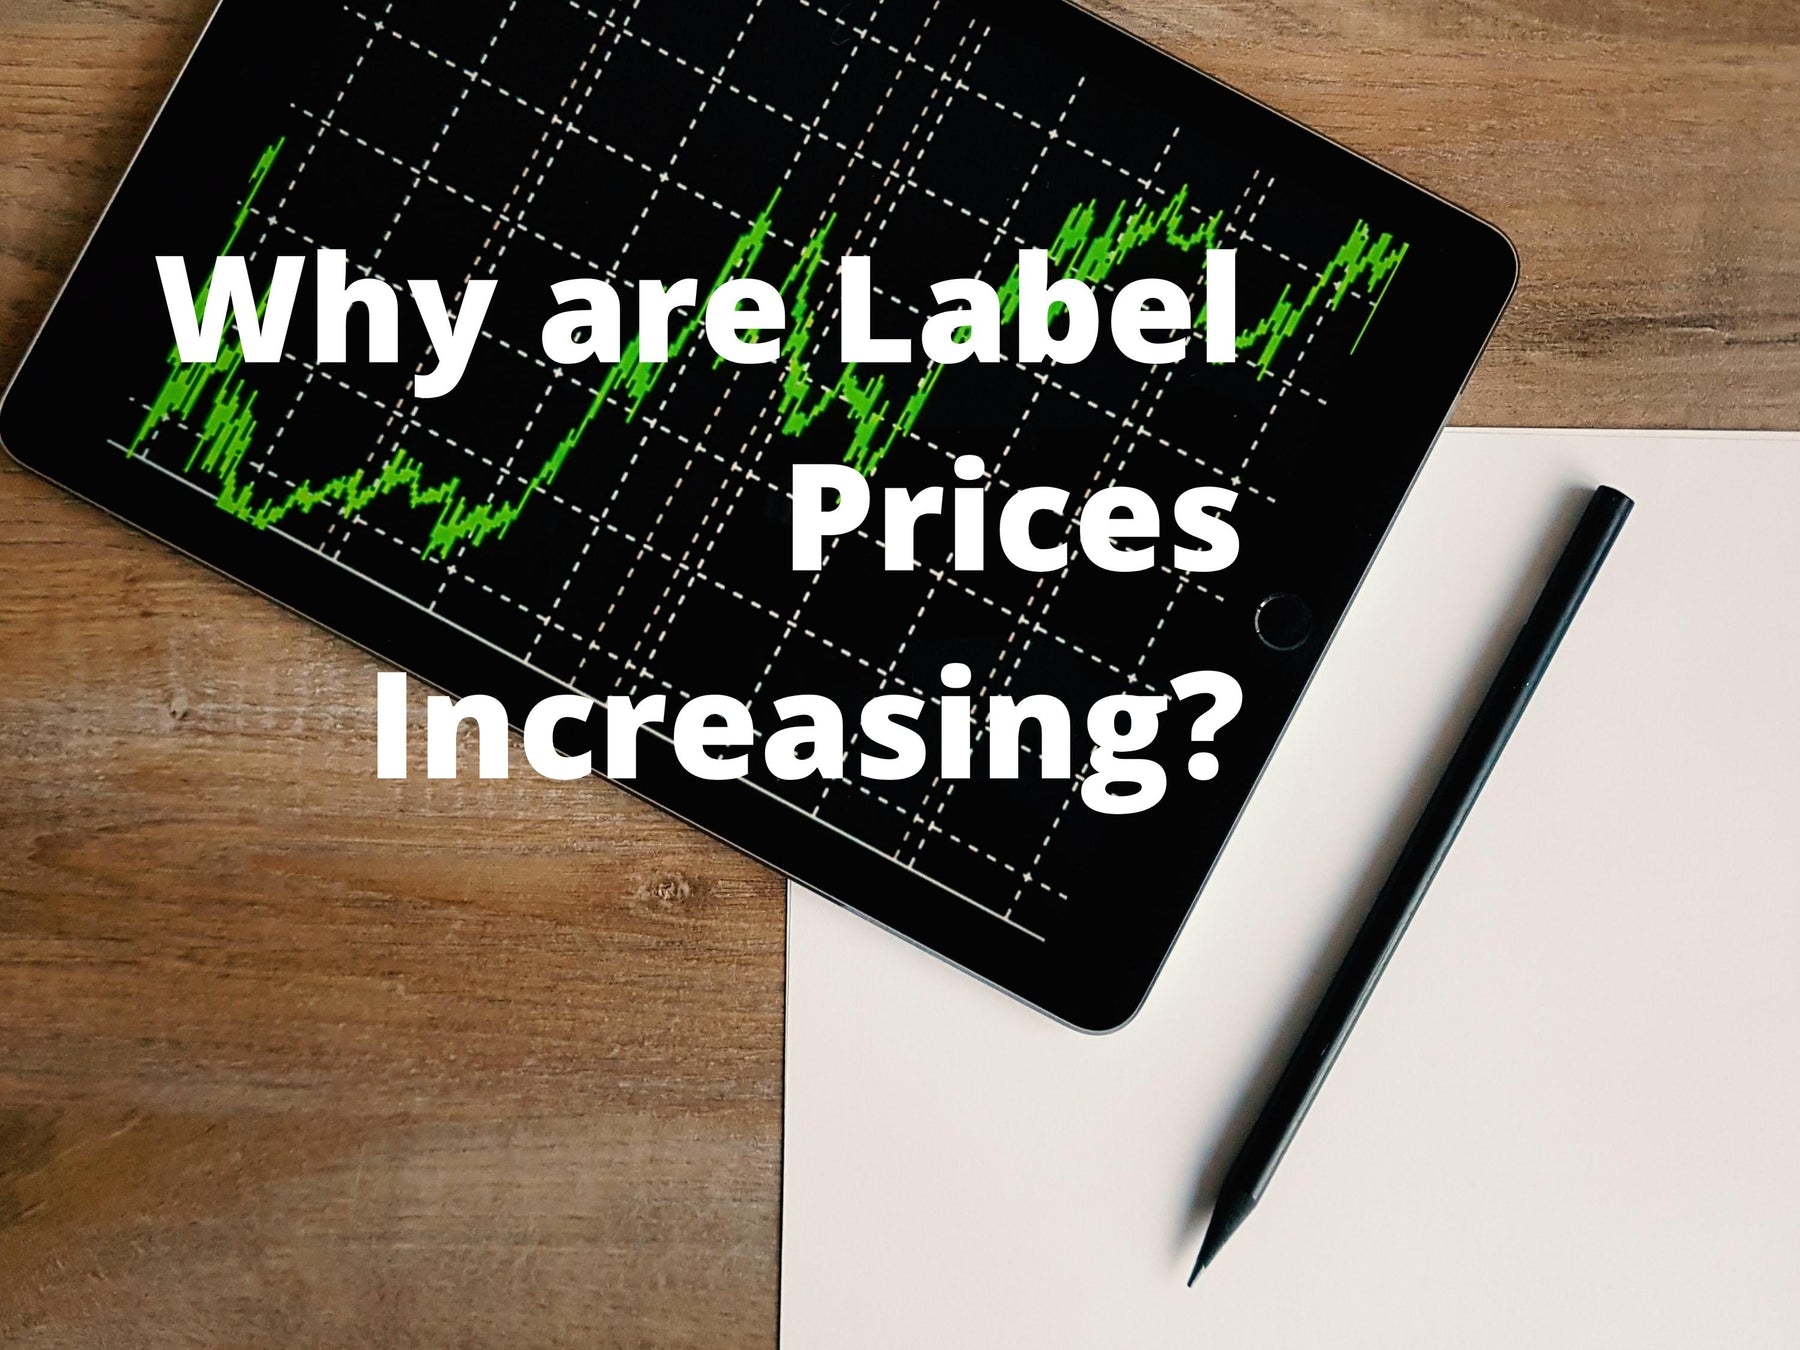 Why are Label Prices Increasing?